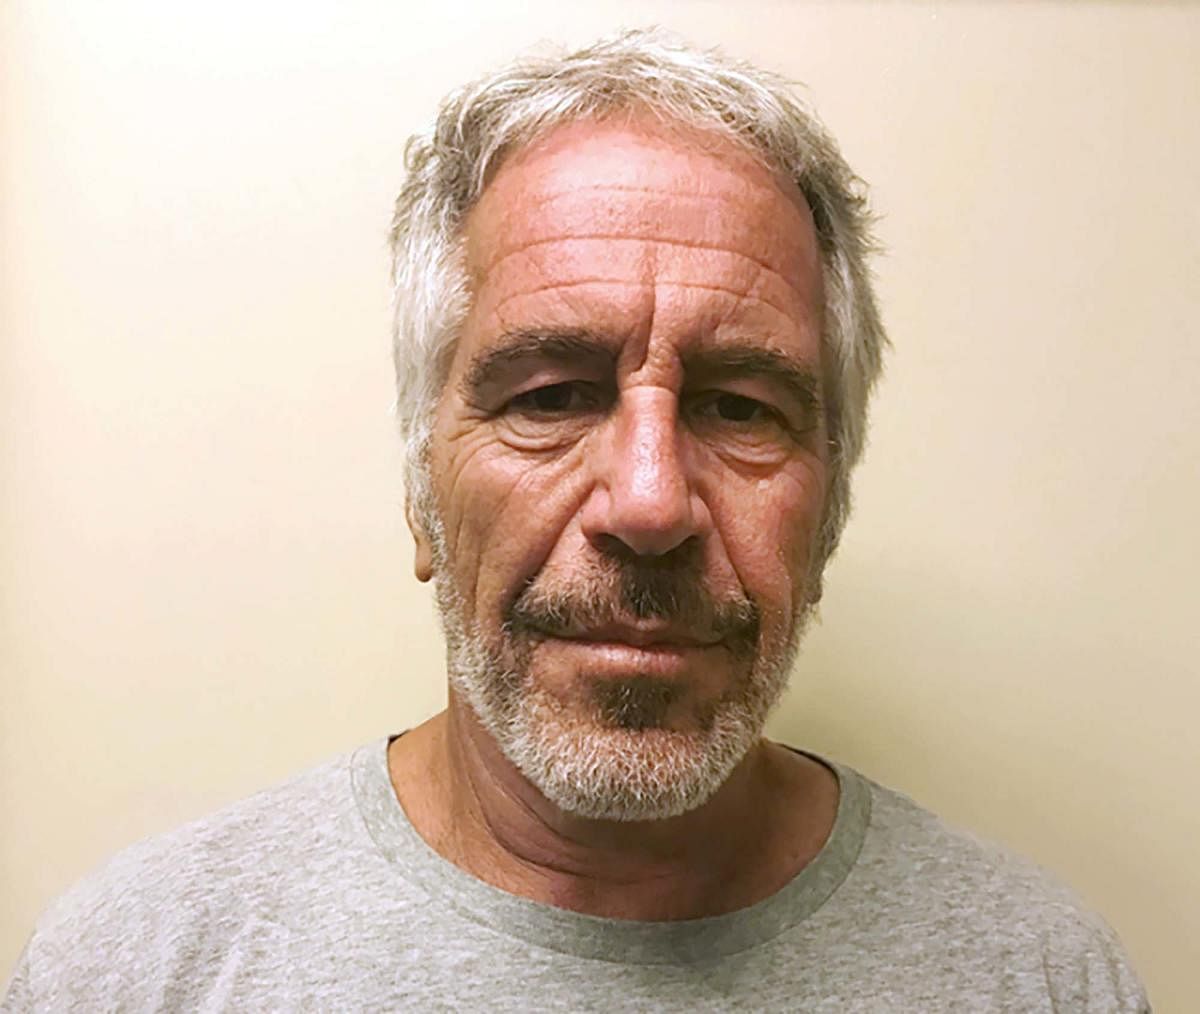 Epstein, 66, was found unresponsive Saturday morning in his cell at the Metropolitan Correctional Center (MCC) in Manhattan, having apparently hanged himself, according to federal prison authorities.  (AP/PTI Photo)